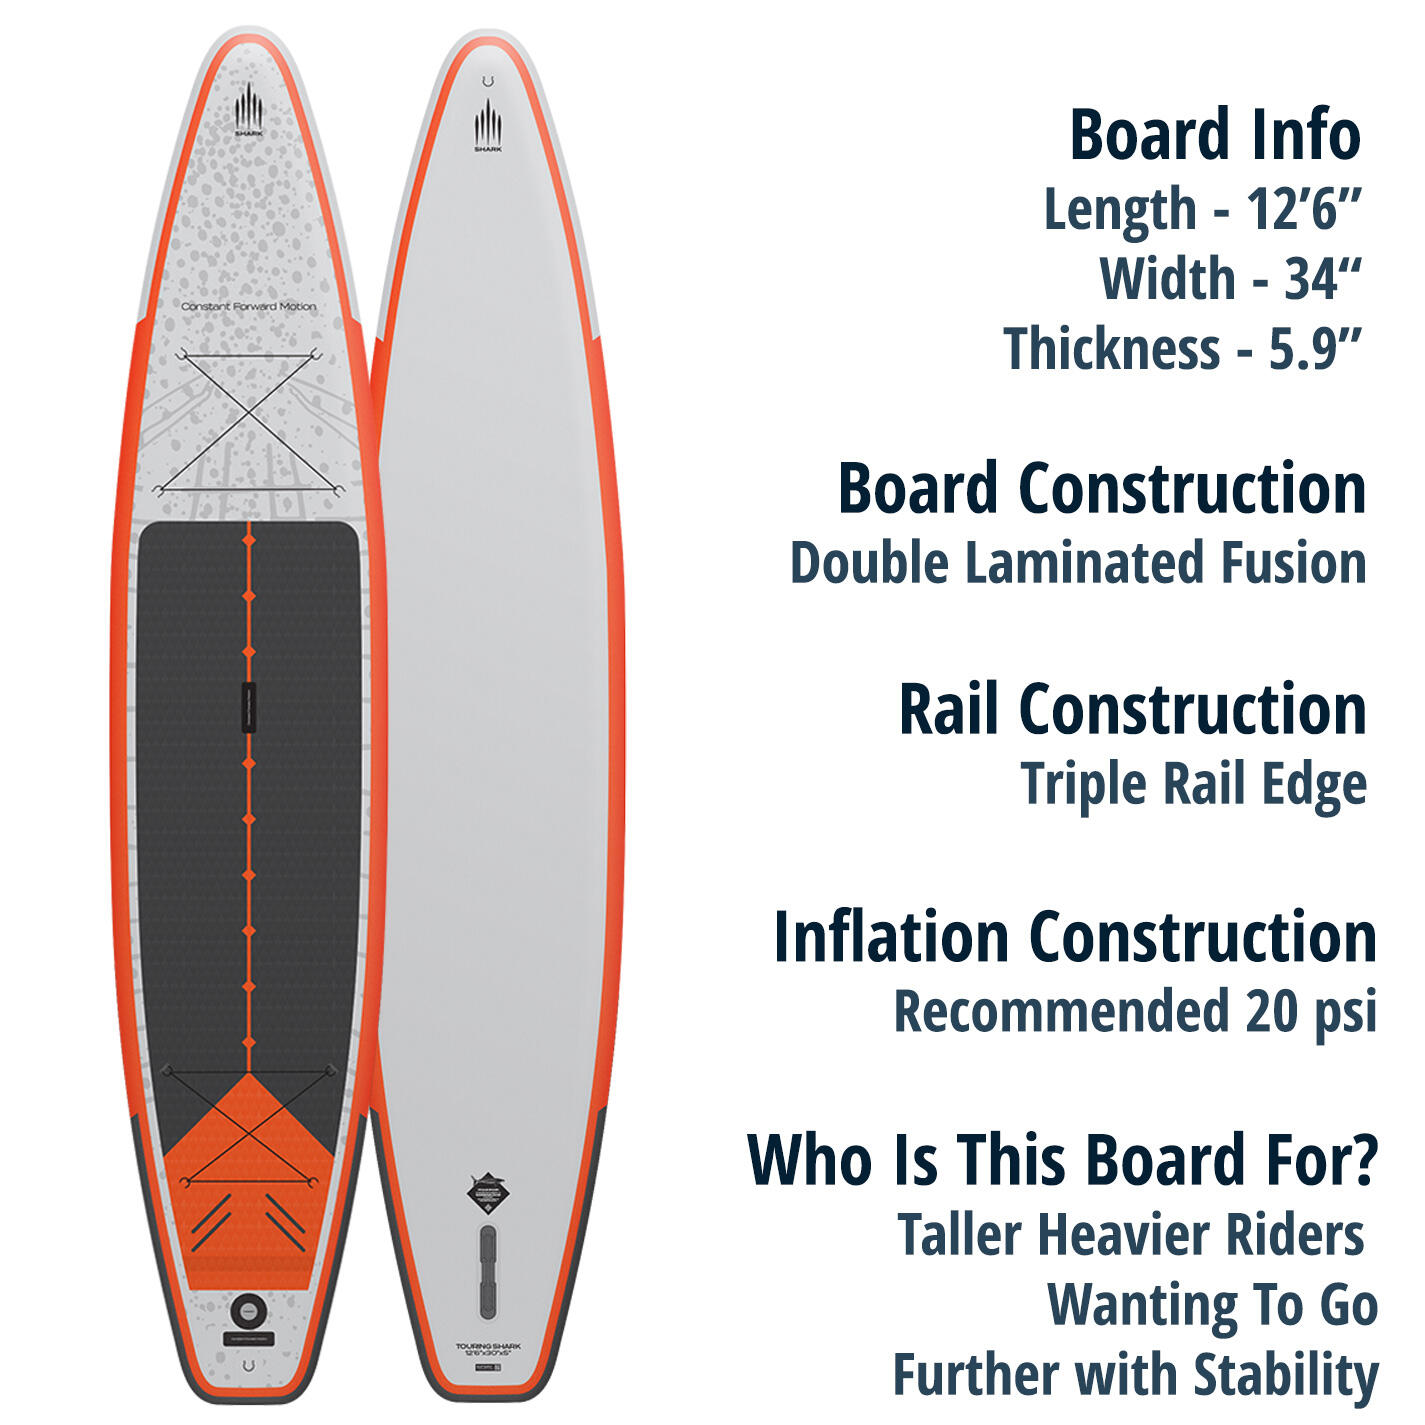 SHARK TOURING 12'6 x 34" x 6" FOR TALLER AND HEAVIER PADDLEBOARDERS 2/6